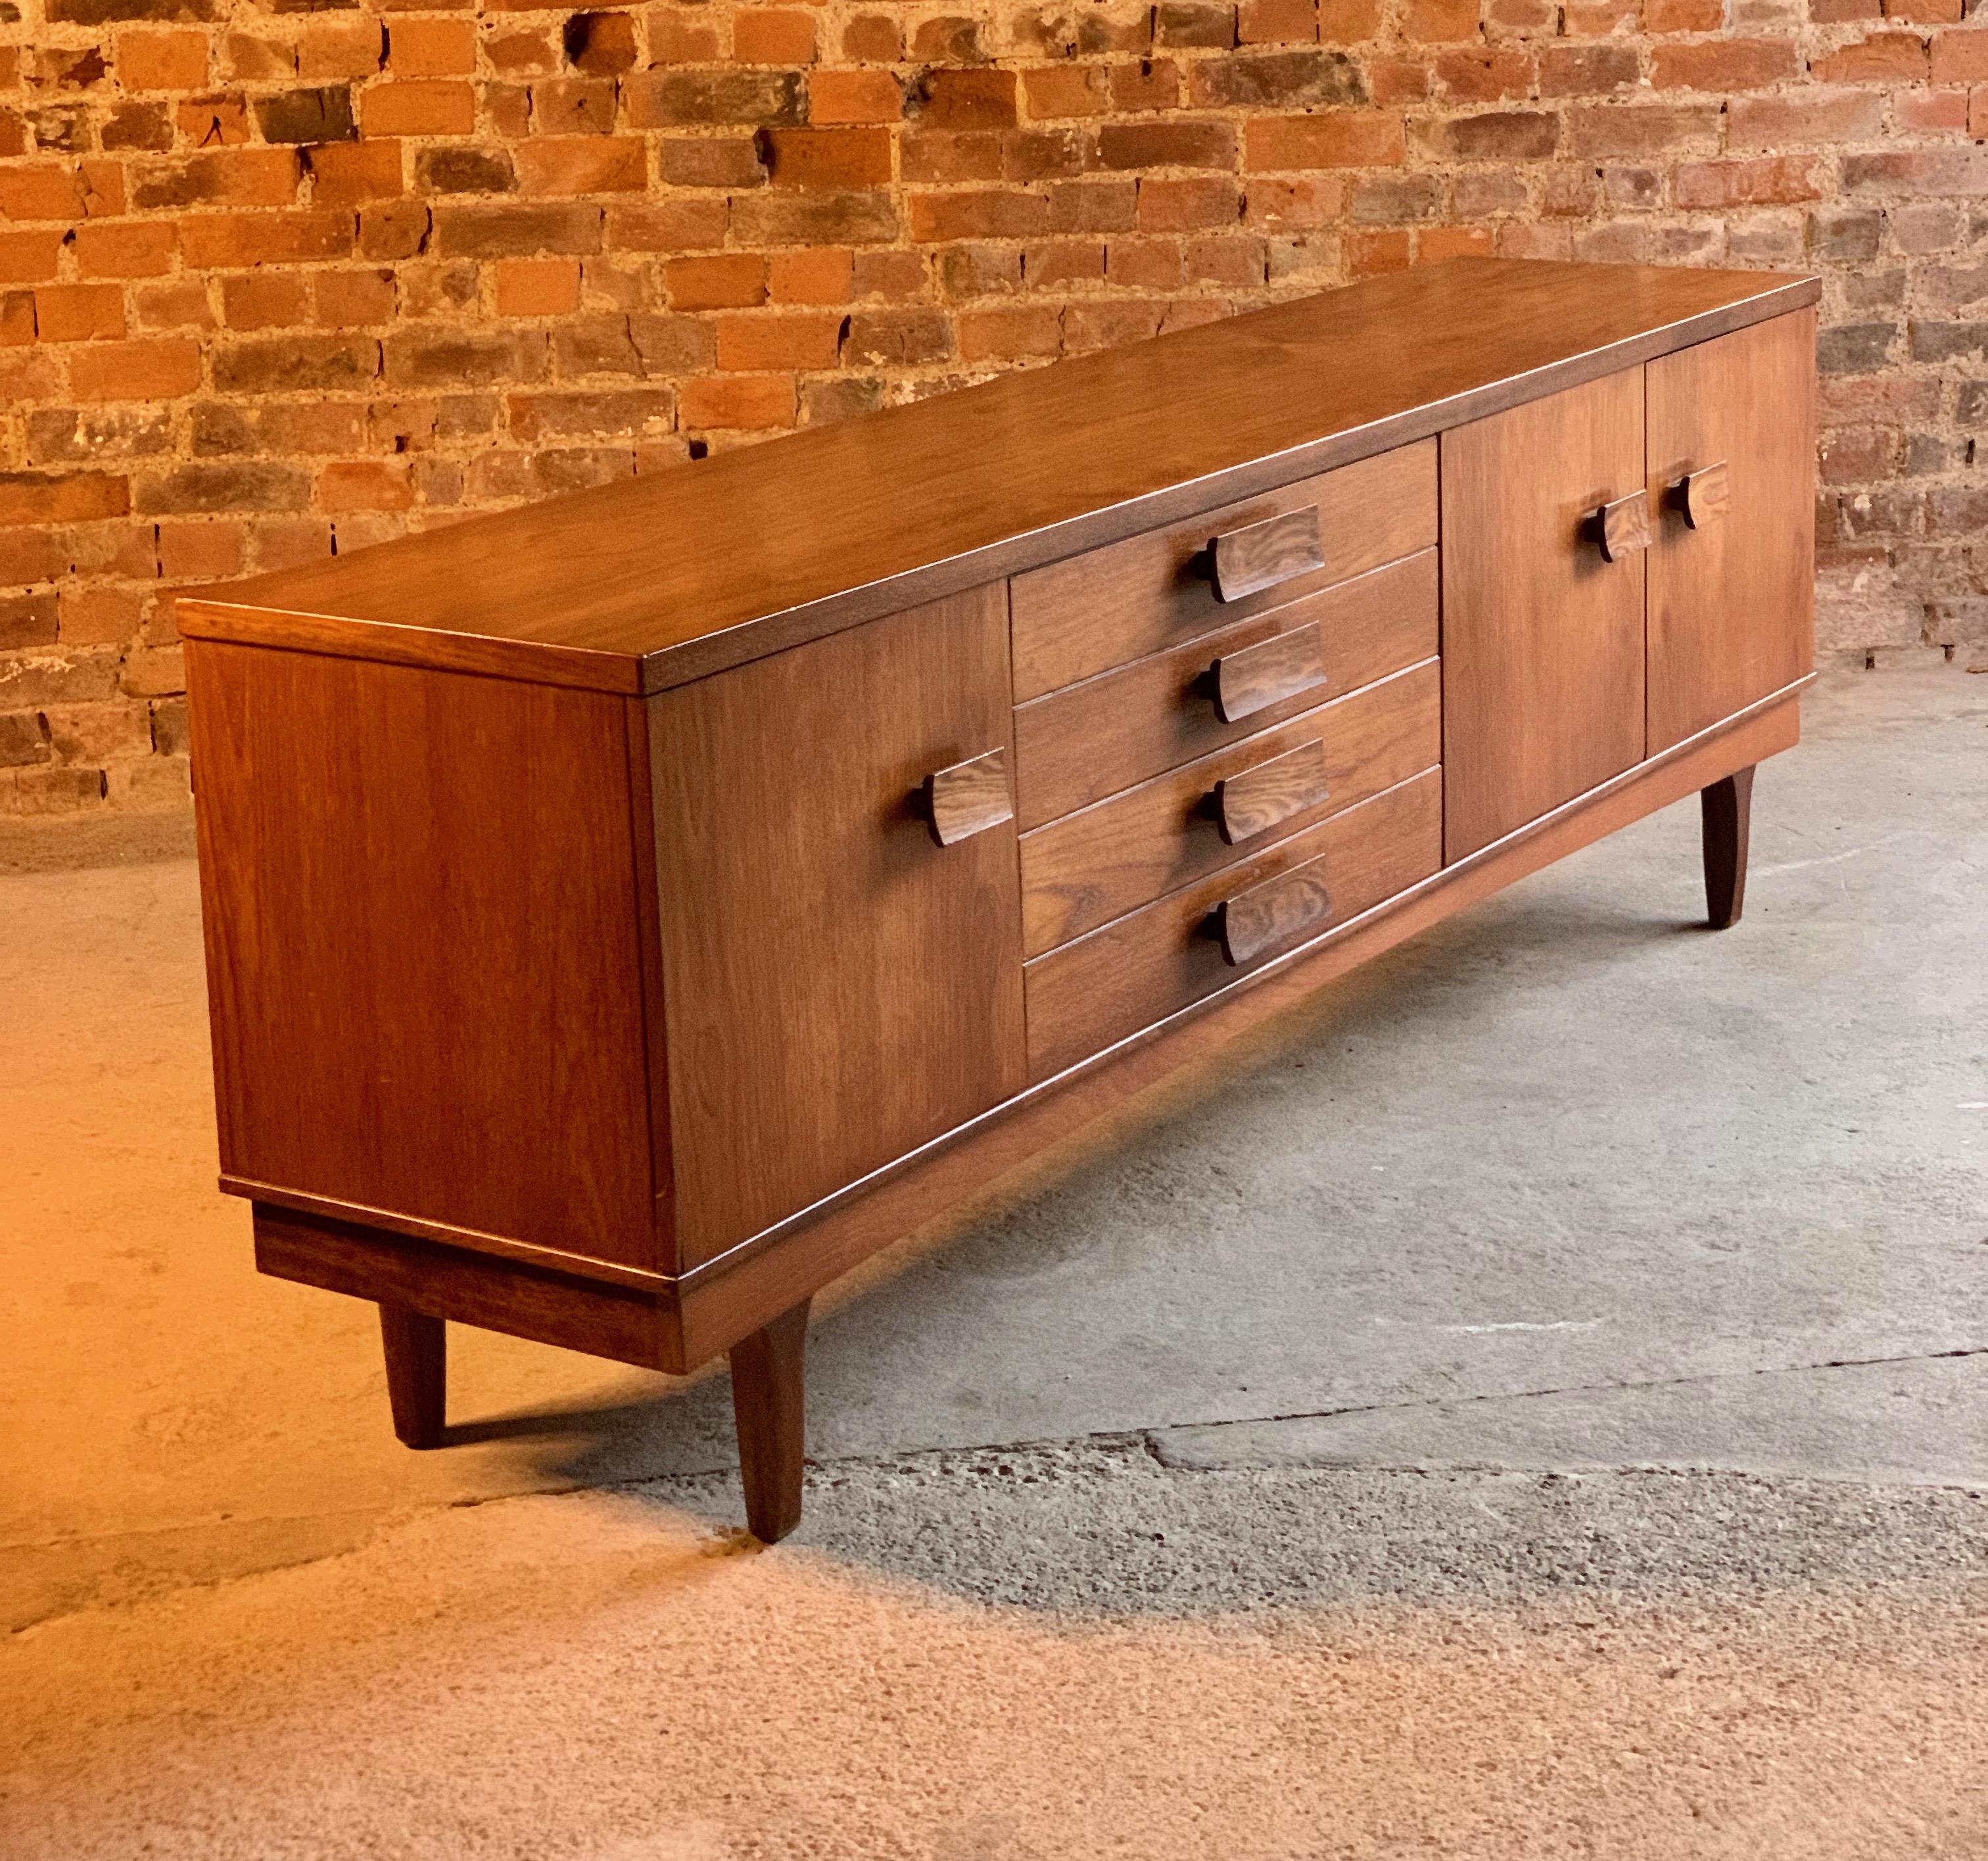 Fabulous BCM 'Bath Cabinet Makers’ African teak and rosewood sideboard credenza, made in the UK in the 1960s, a quality piece with lovely grains and chunky rosewood pull handles, the rectangular top over a single cupboard door with shelf within,